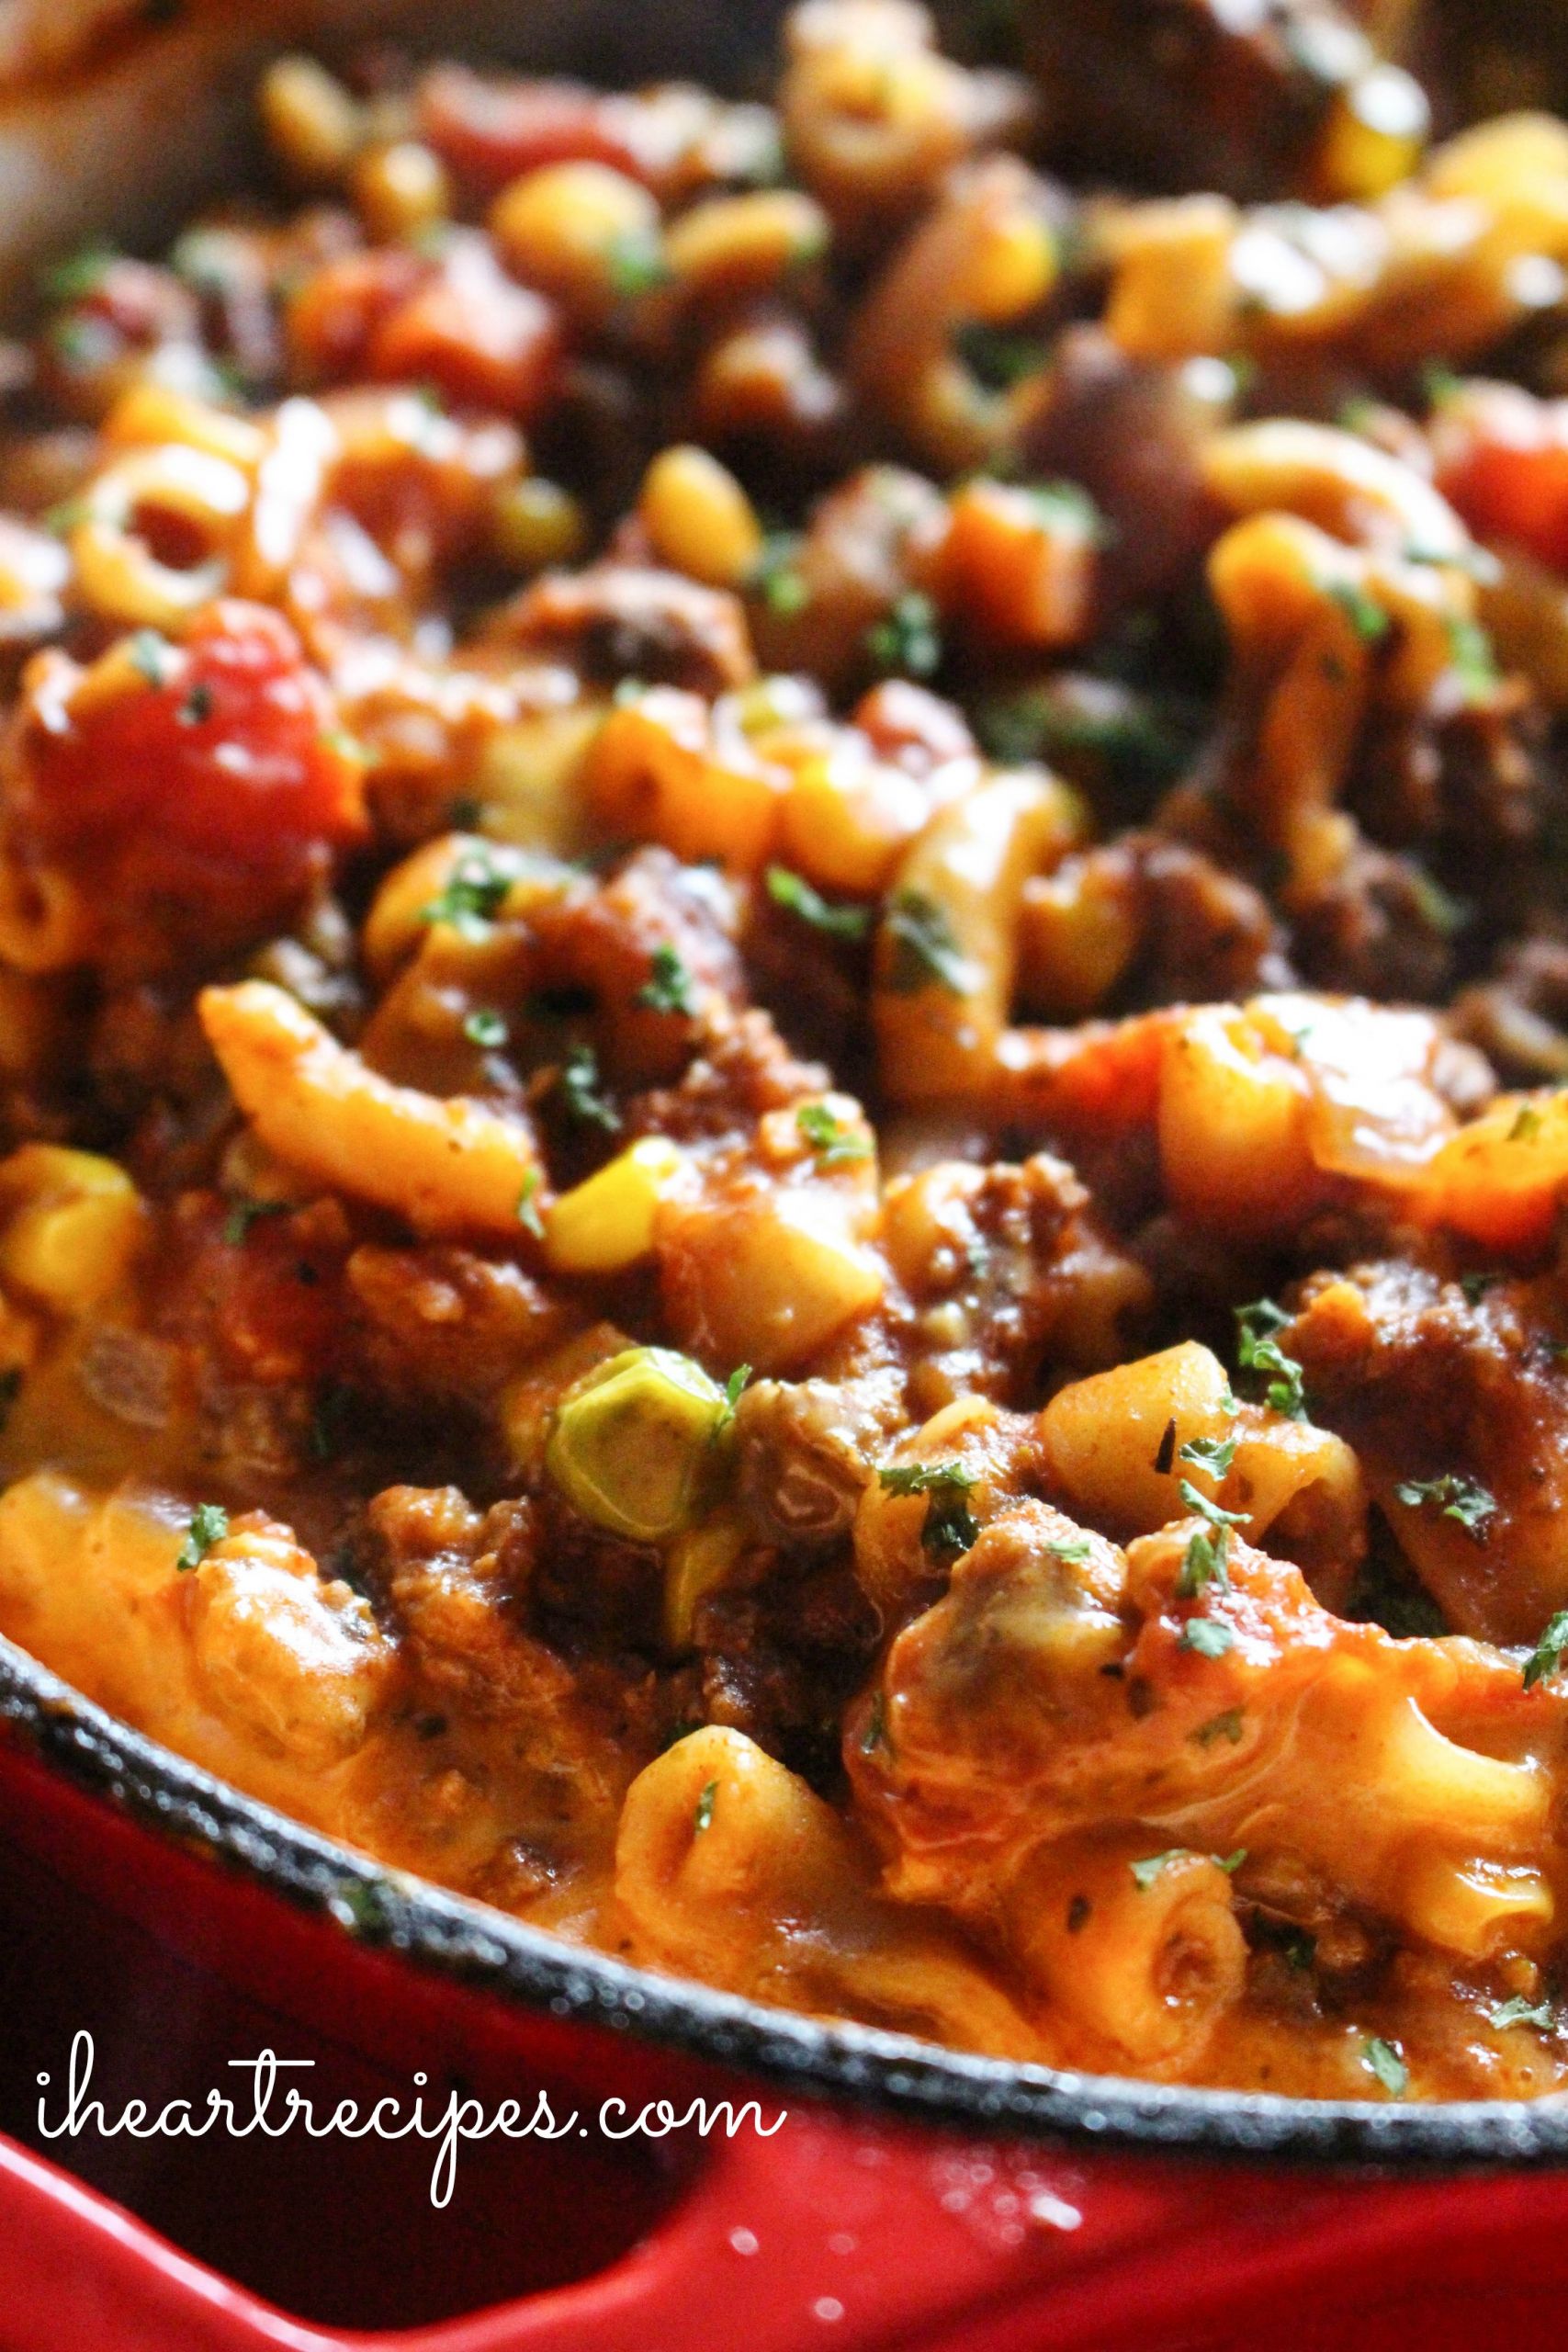 Recipes That Use Ground Beef
 Old Fashioned Beef Goulash